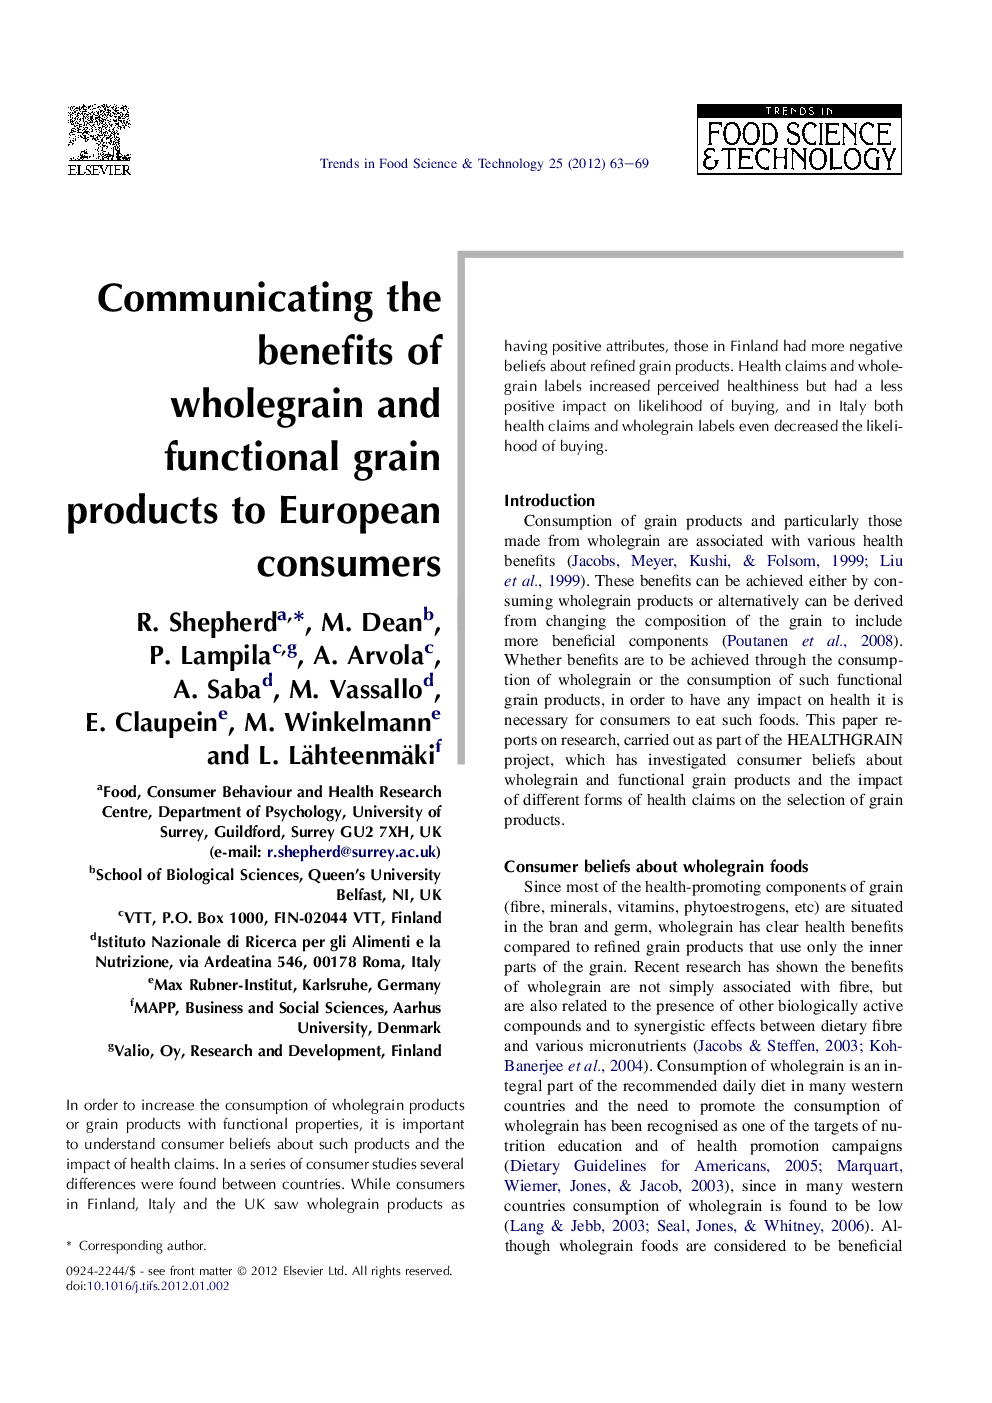 Communicating the benefits of wholegrain and functional grain products to European consumers